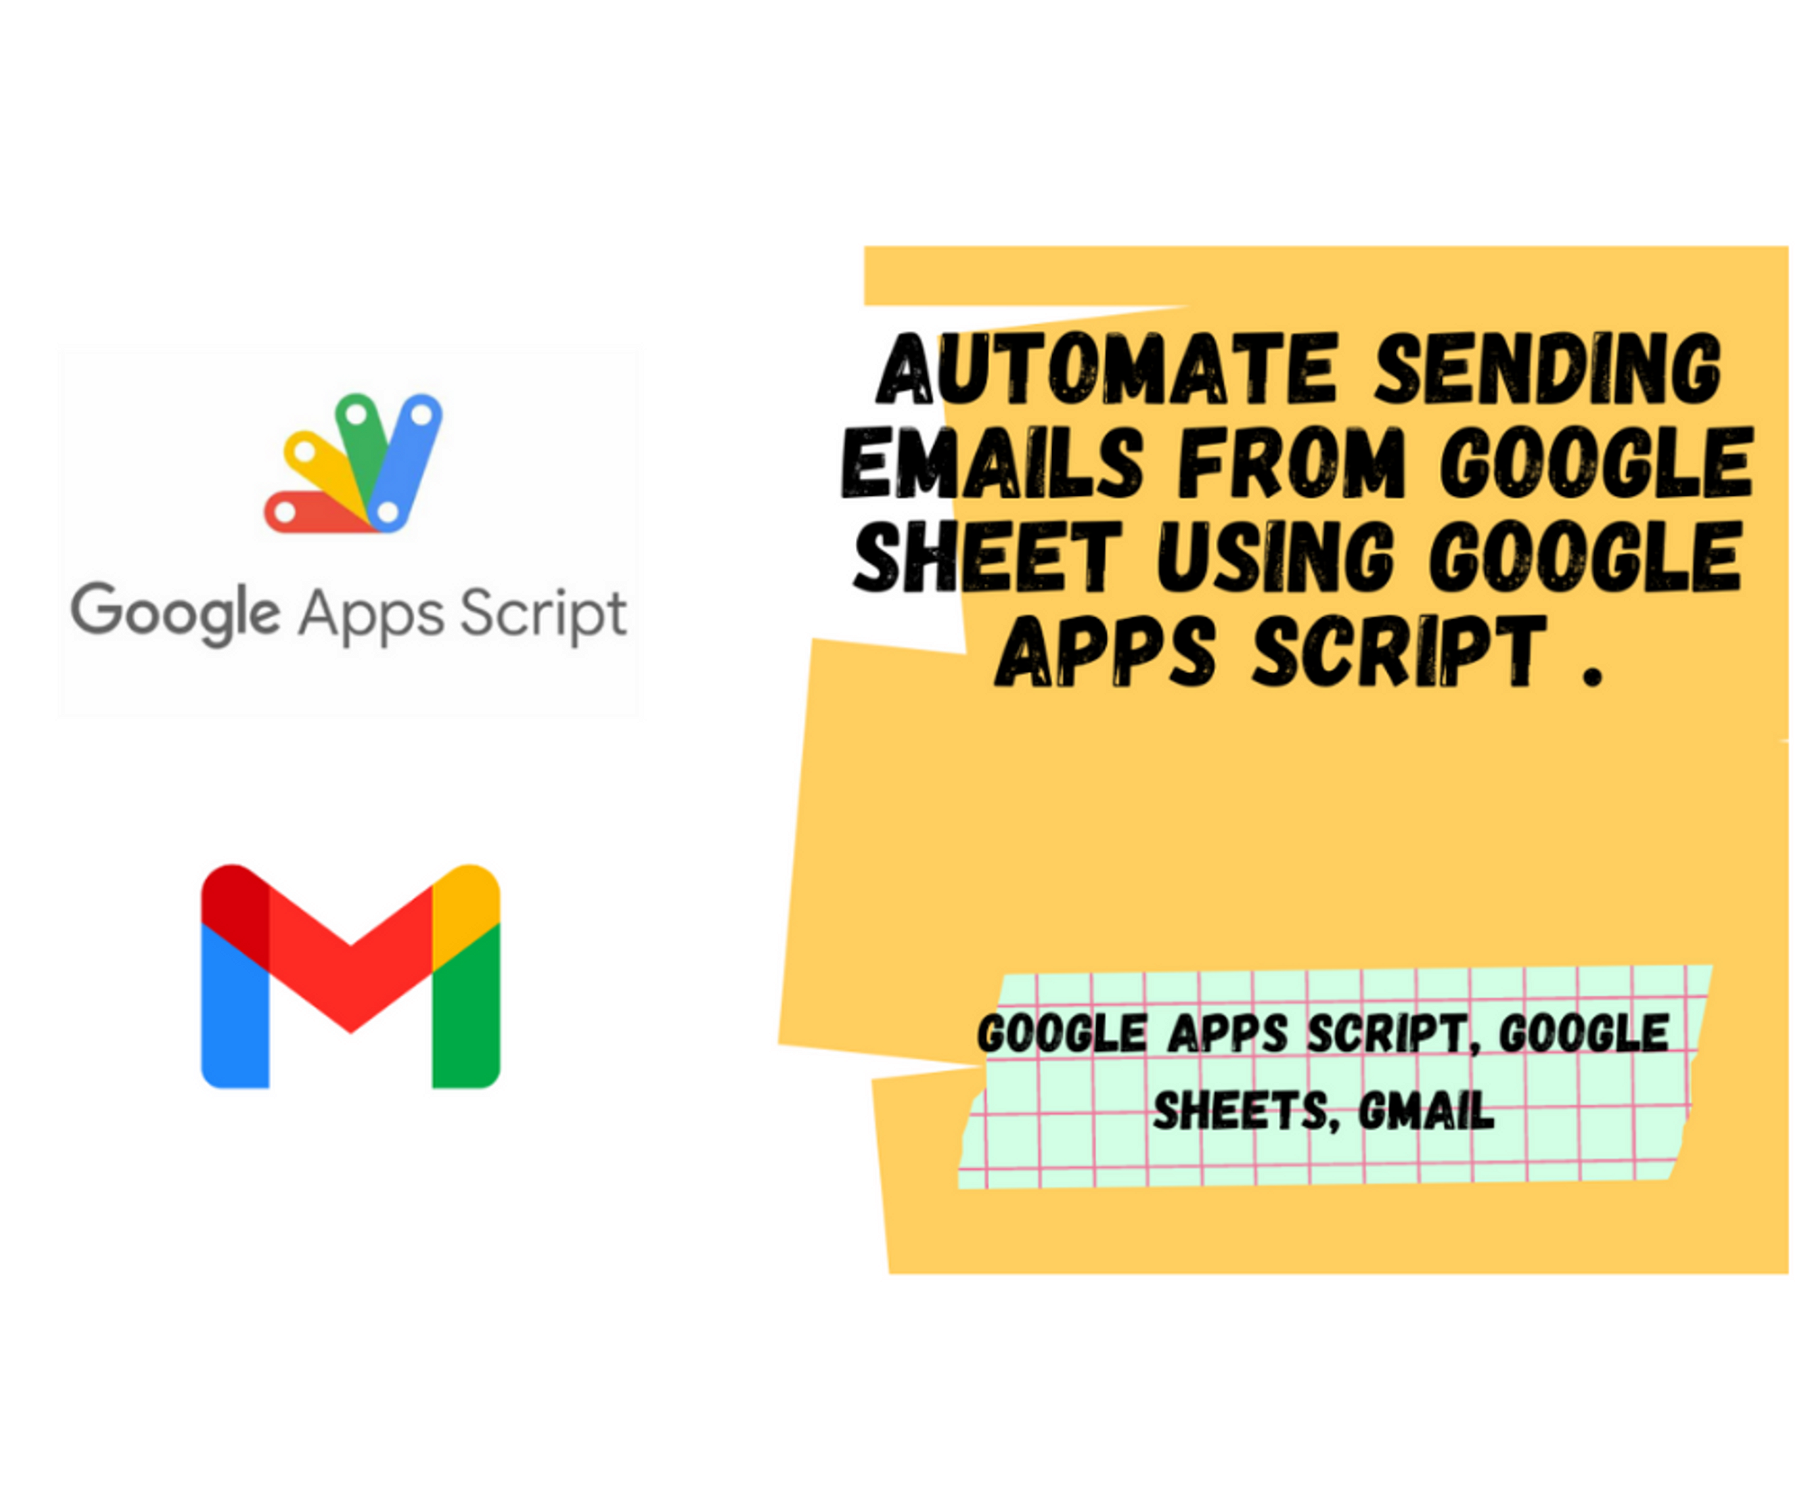 Automate sending emails from google sheet using Google Apps Script